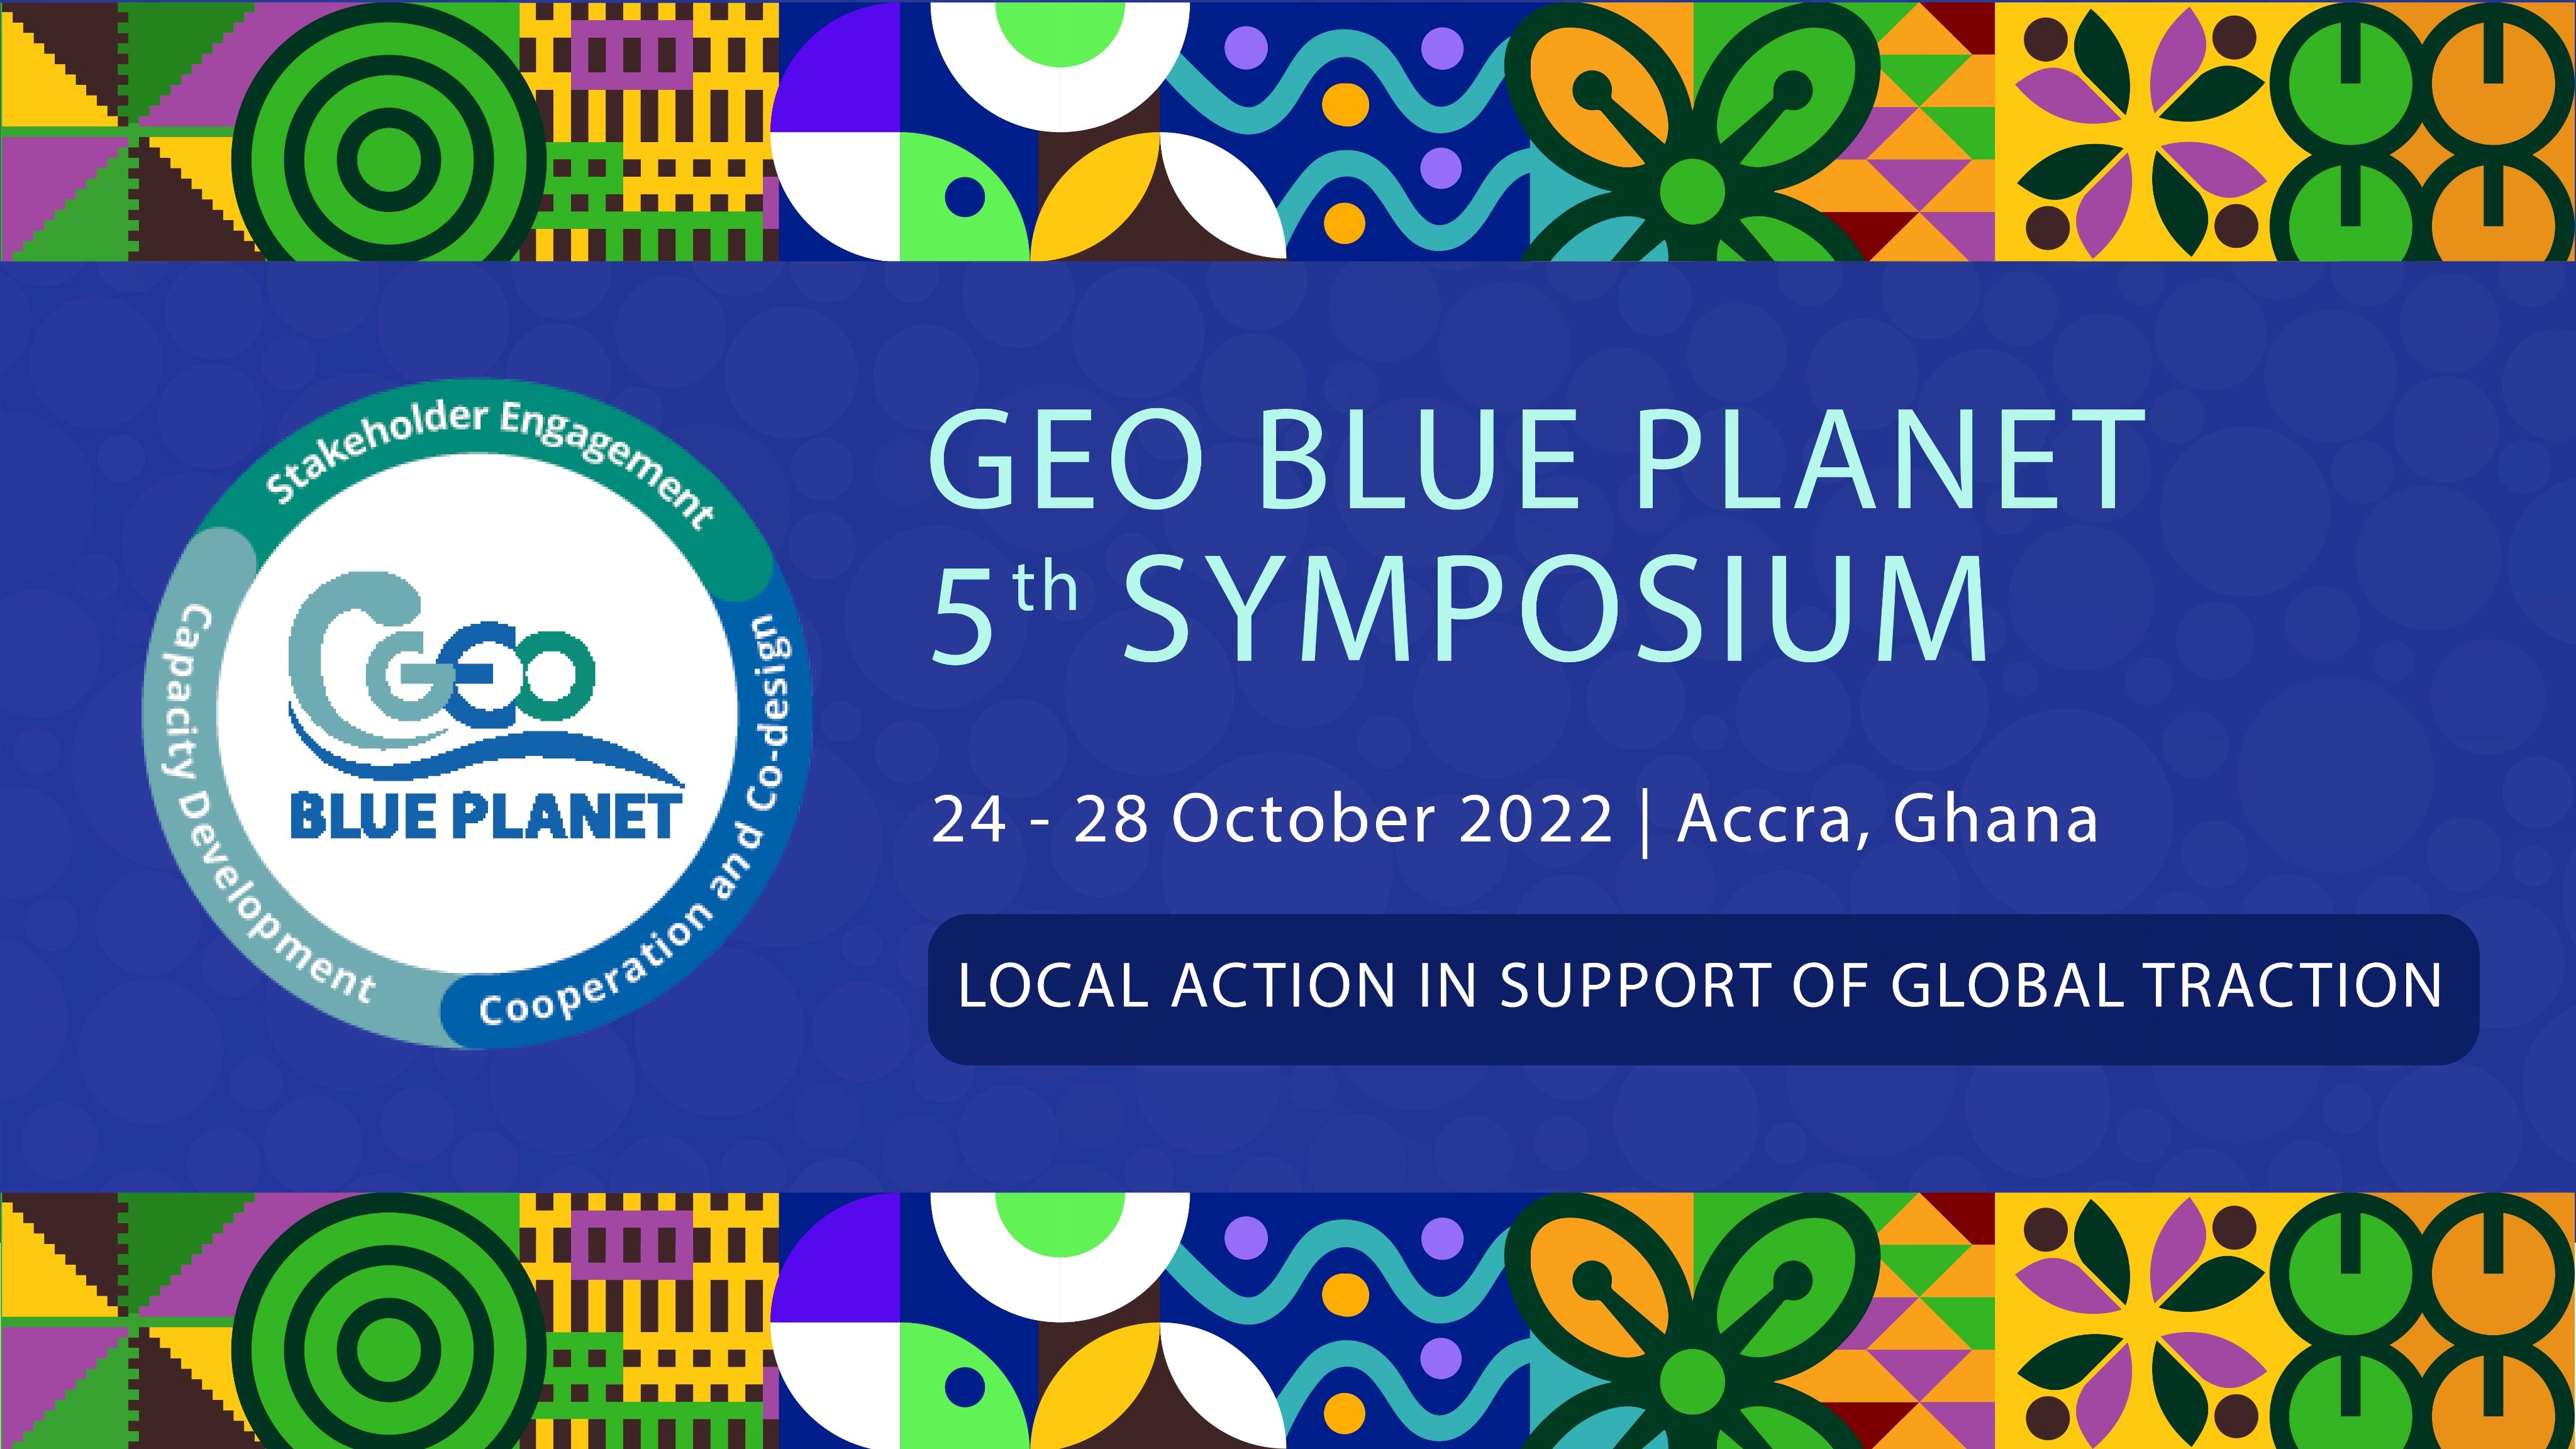 5th GEO Blue Planet Symposium (© GEO Blue Planet - geoblueplanet.org. All rights reserved)